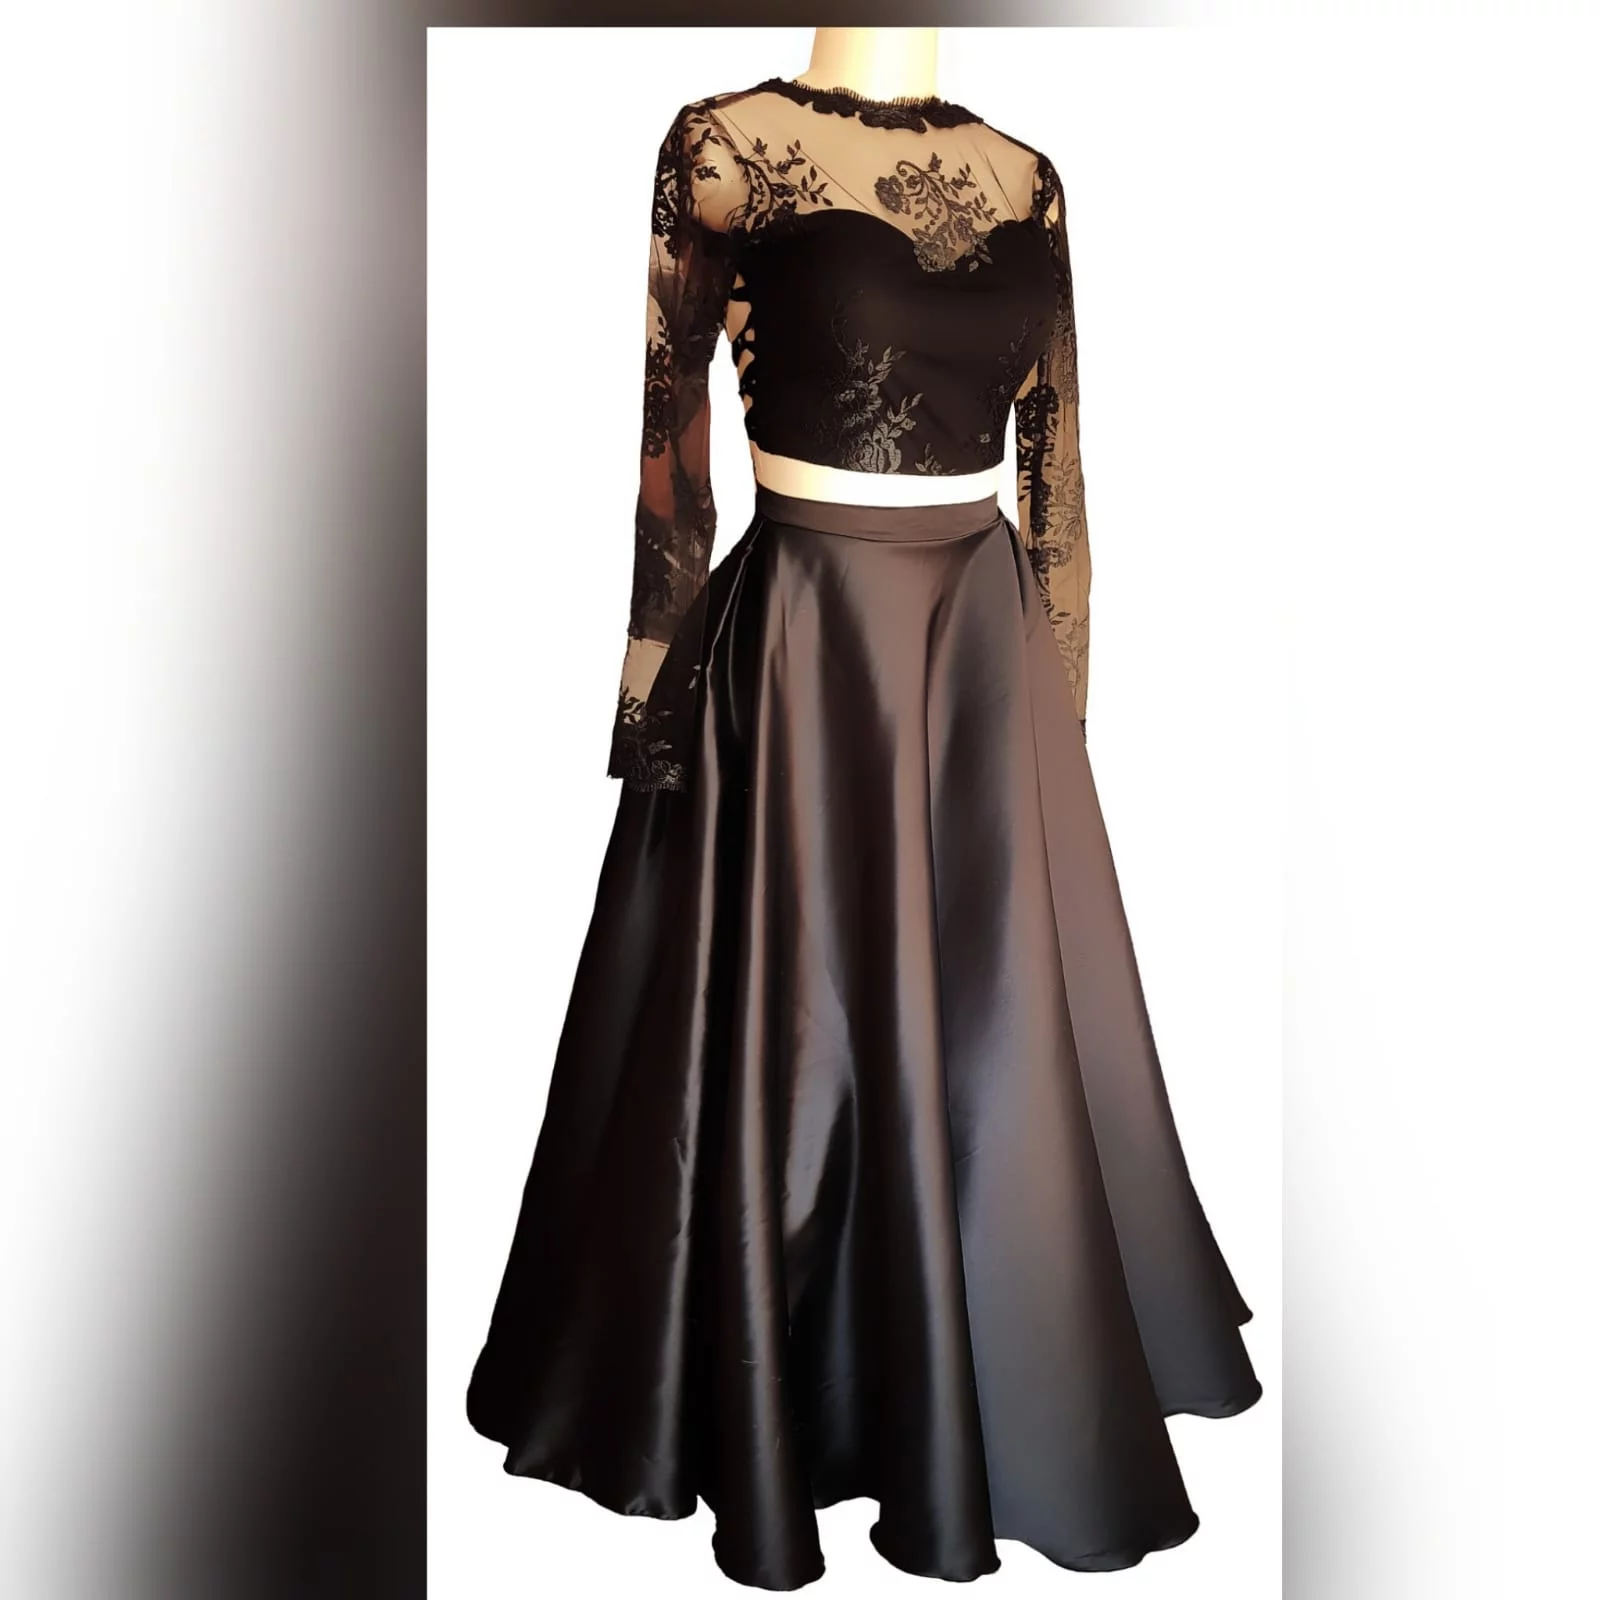 Gorgeous and fun 2 piece black dress 3 <blockquote>"be yourself; everyone else is already taken. "oscar wilde</blockquote> this gorgeous and fun 2 pieces black dress was created for a special occasion. Make memories with this luxurious satin wide skirt and a lace top with sheer neckline and sleeves and a tie-up back. Attend your ceremony looking formal and chic, then change the skirt to a part of pants or jeans for the after-party.